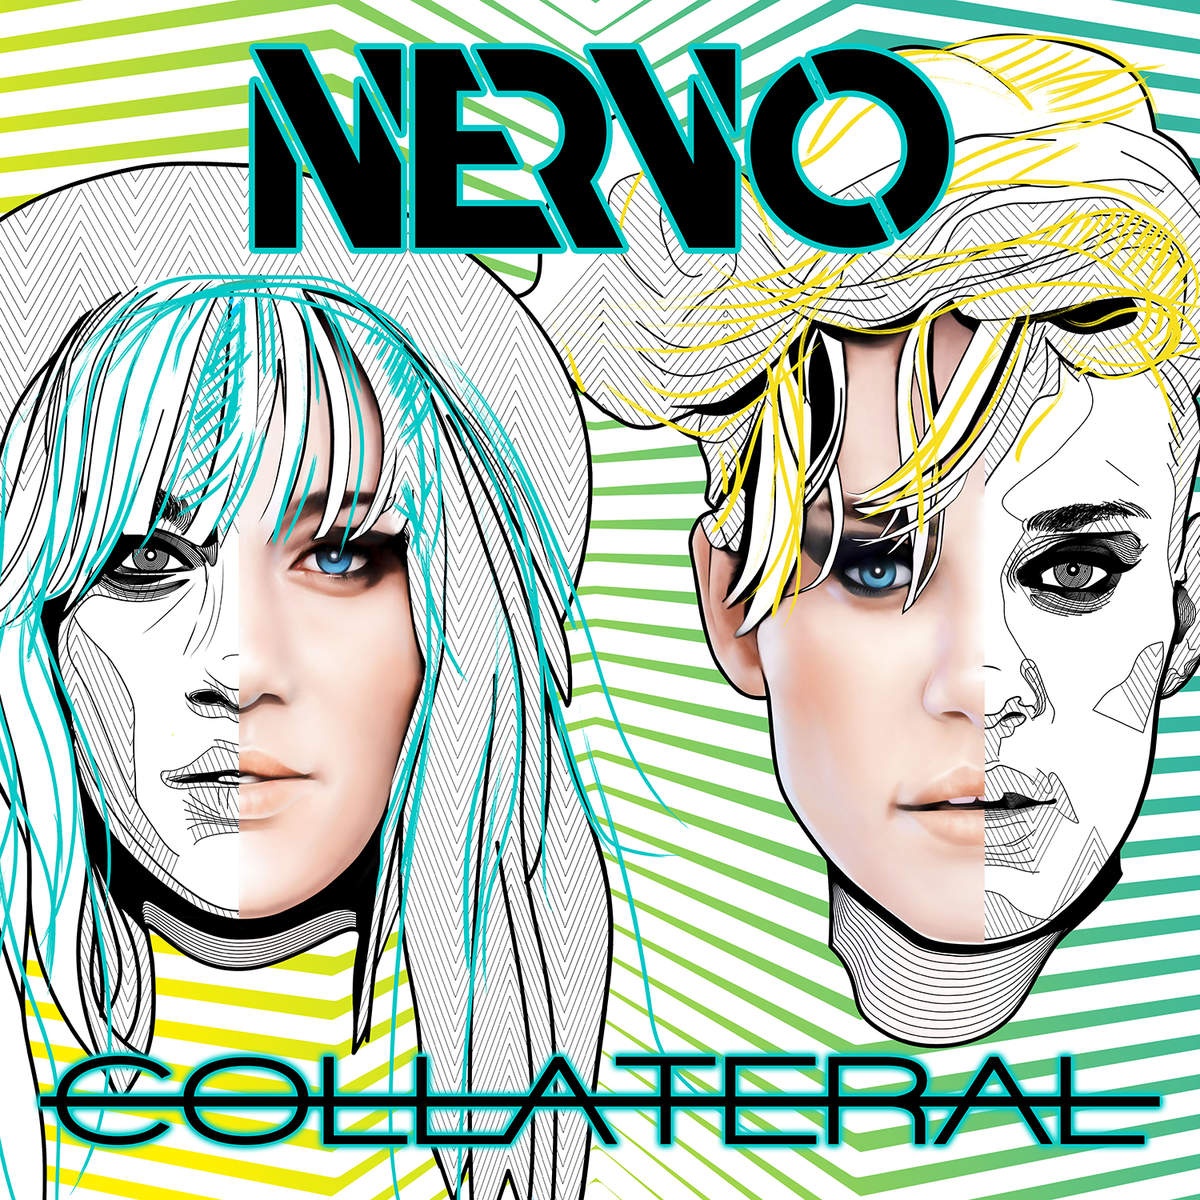 We're All No One [NERVO Goes To Paris Remix]